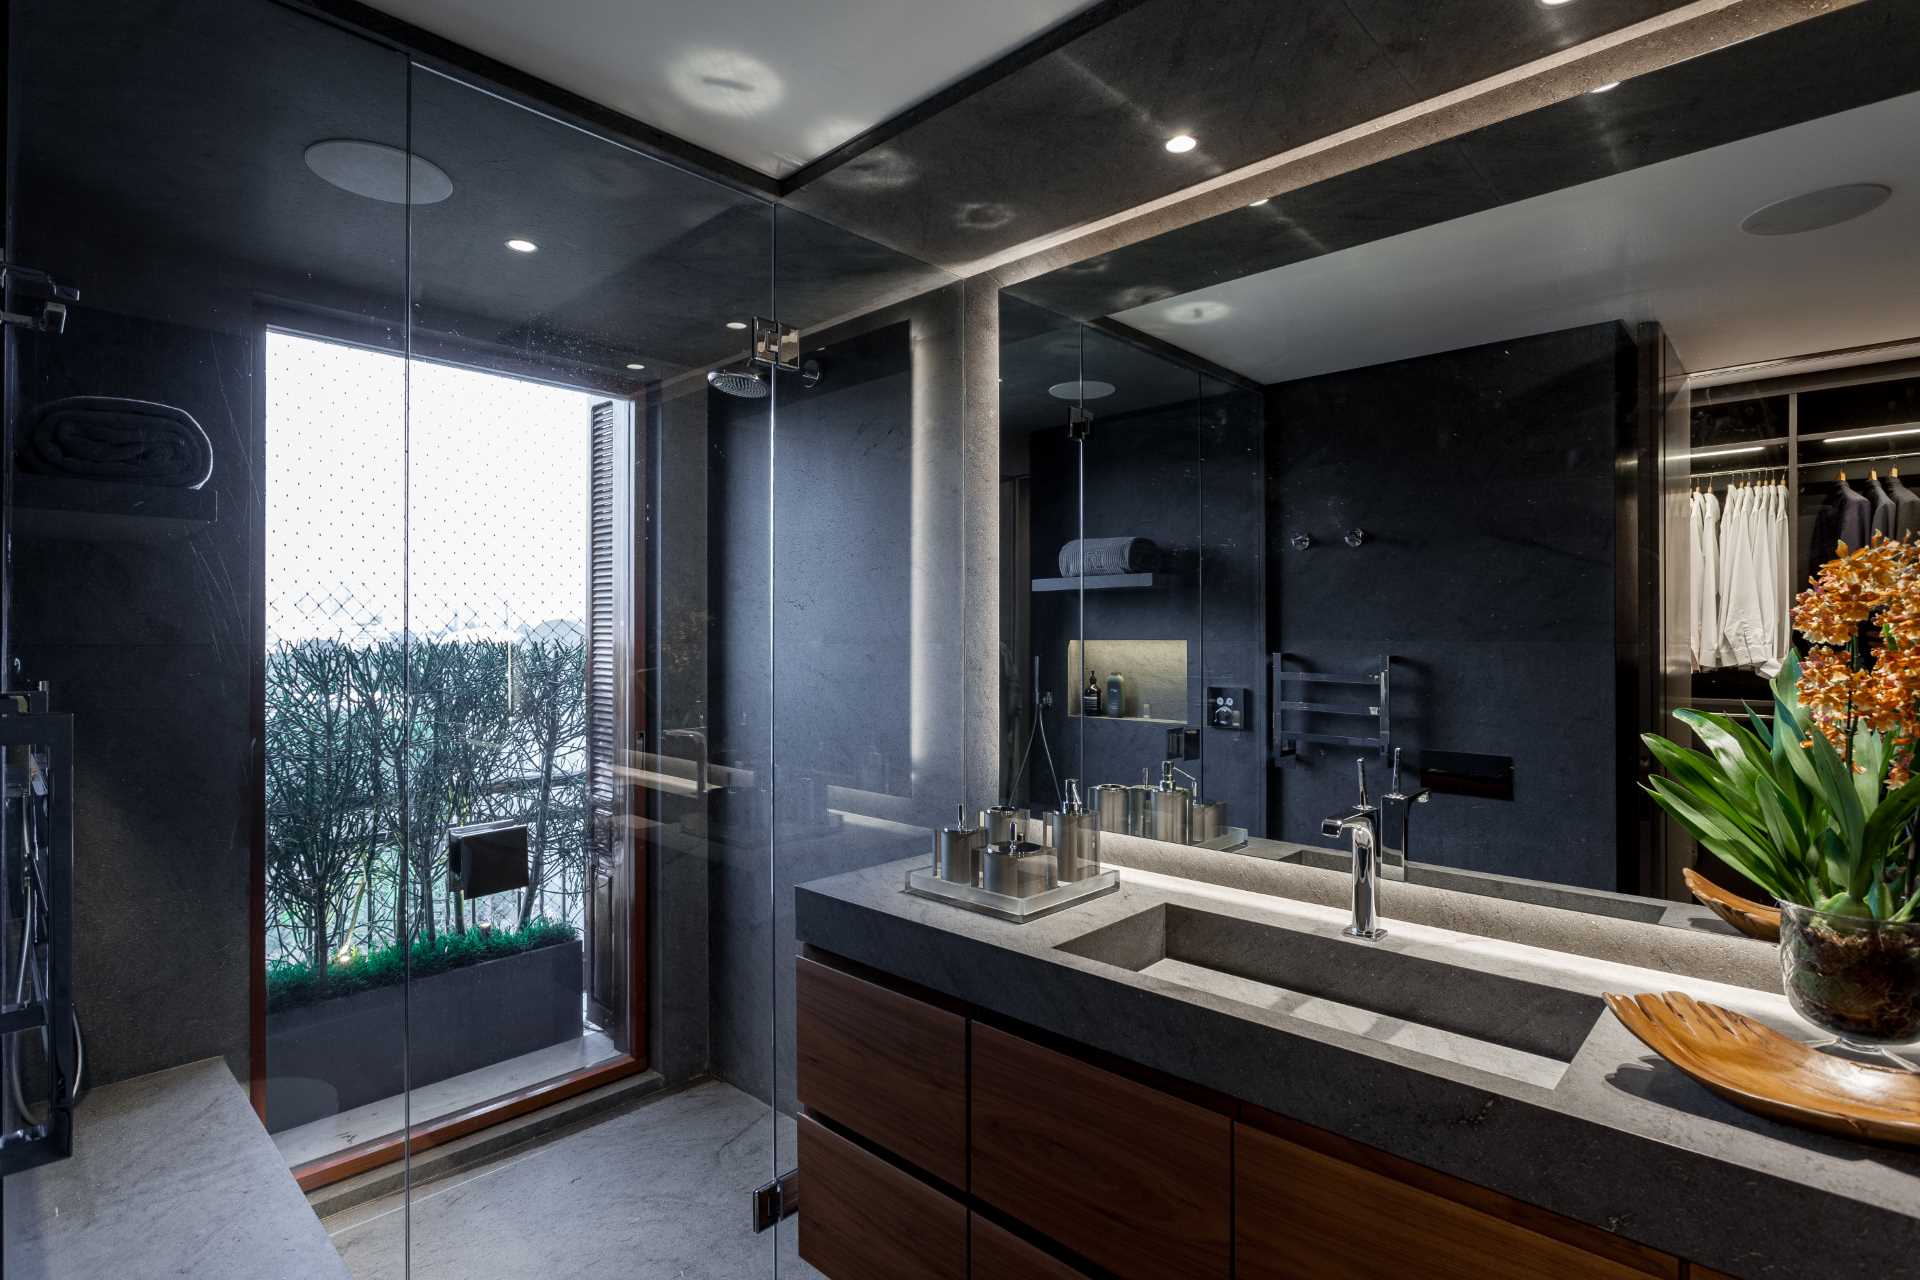 This modern bathroom includes a glass-enclosed shower by the window, a dark wood vanity, and a large mirror.